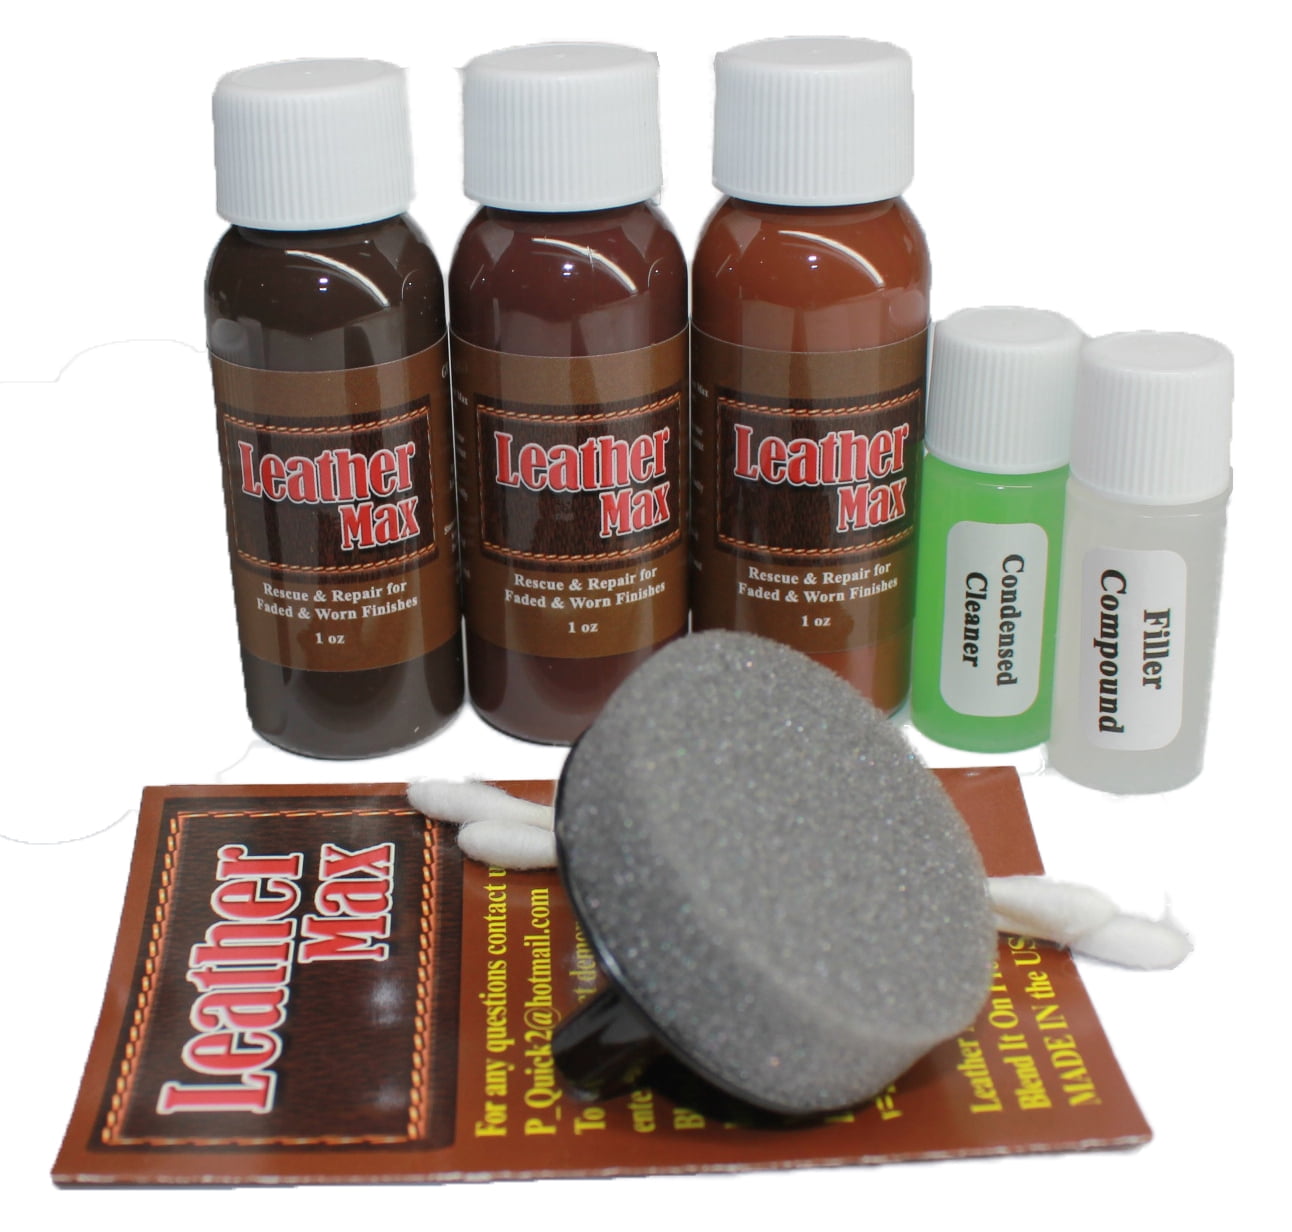 Buy Clyde's™ 4-Step Leather Recoloring Kit